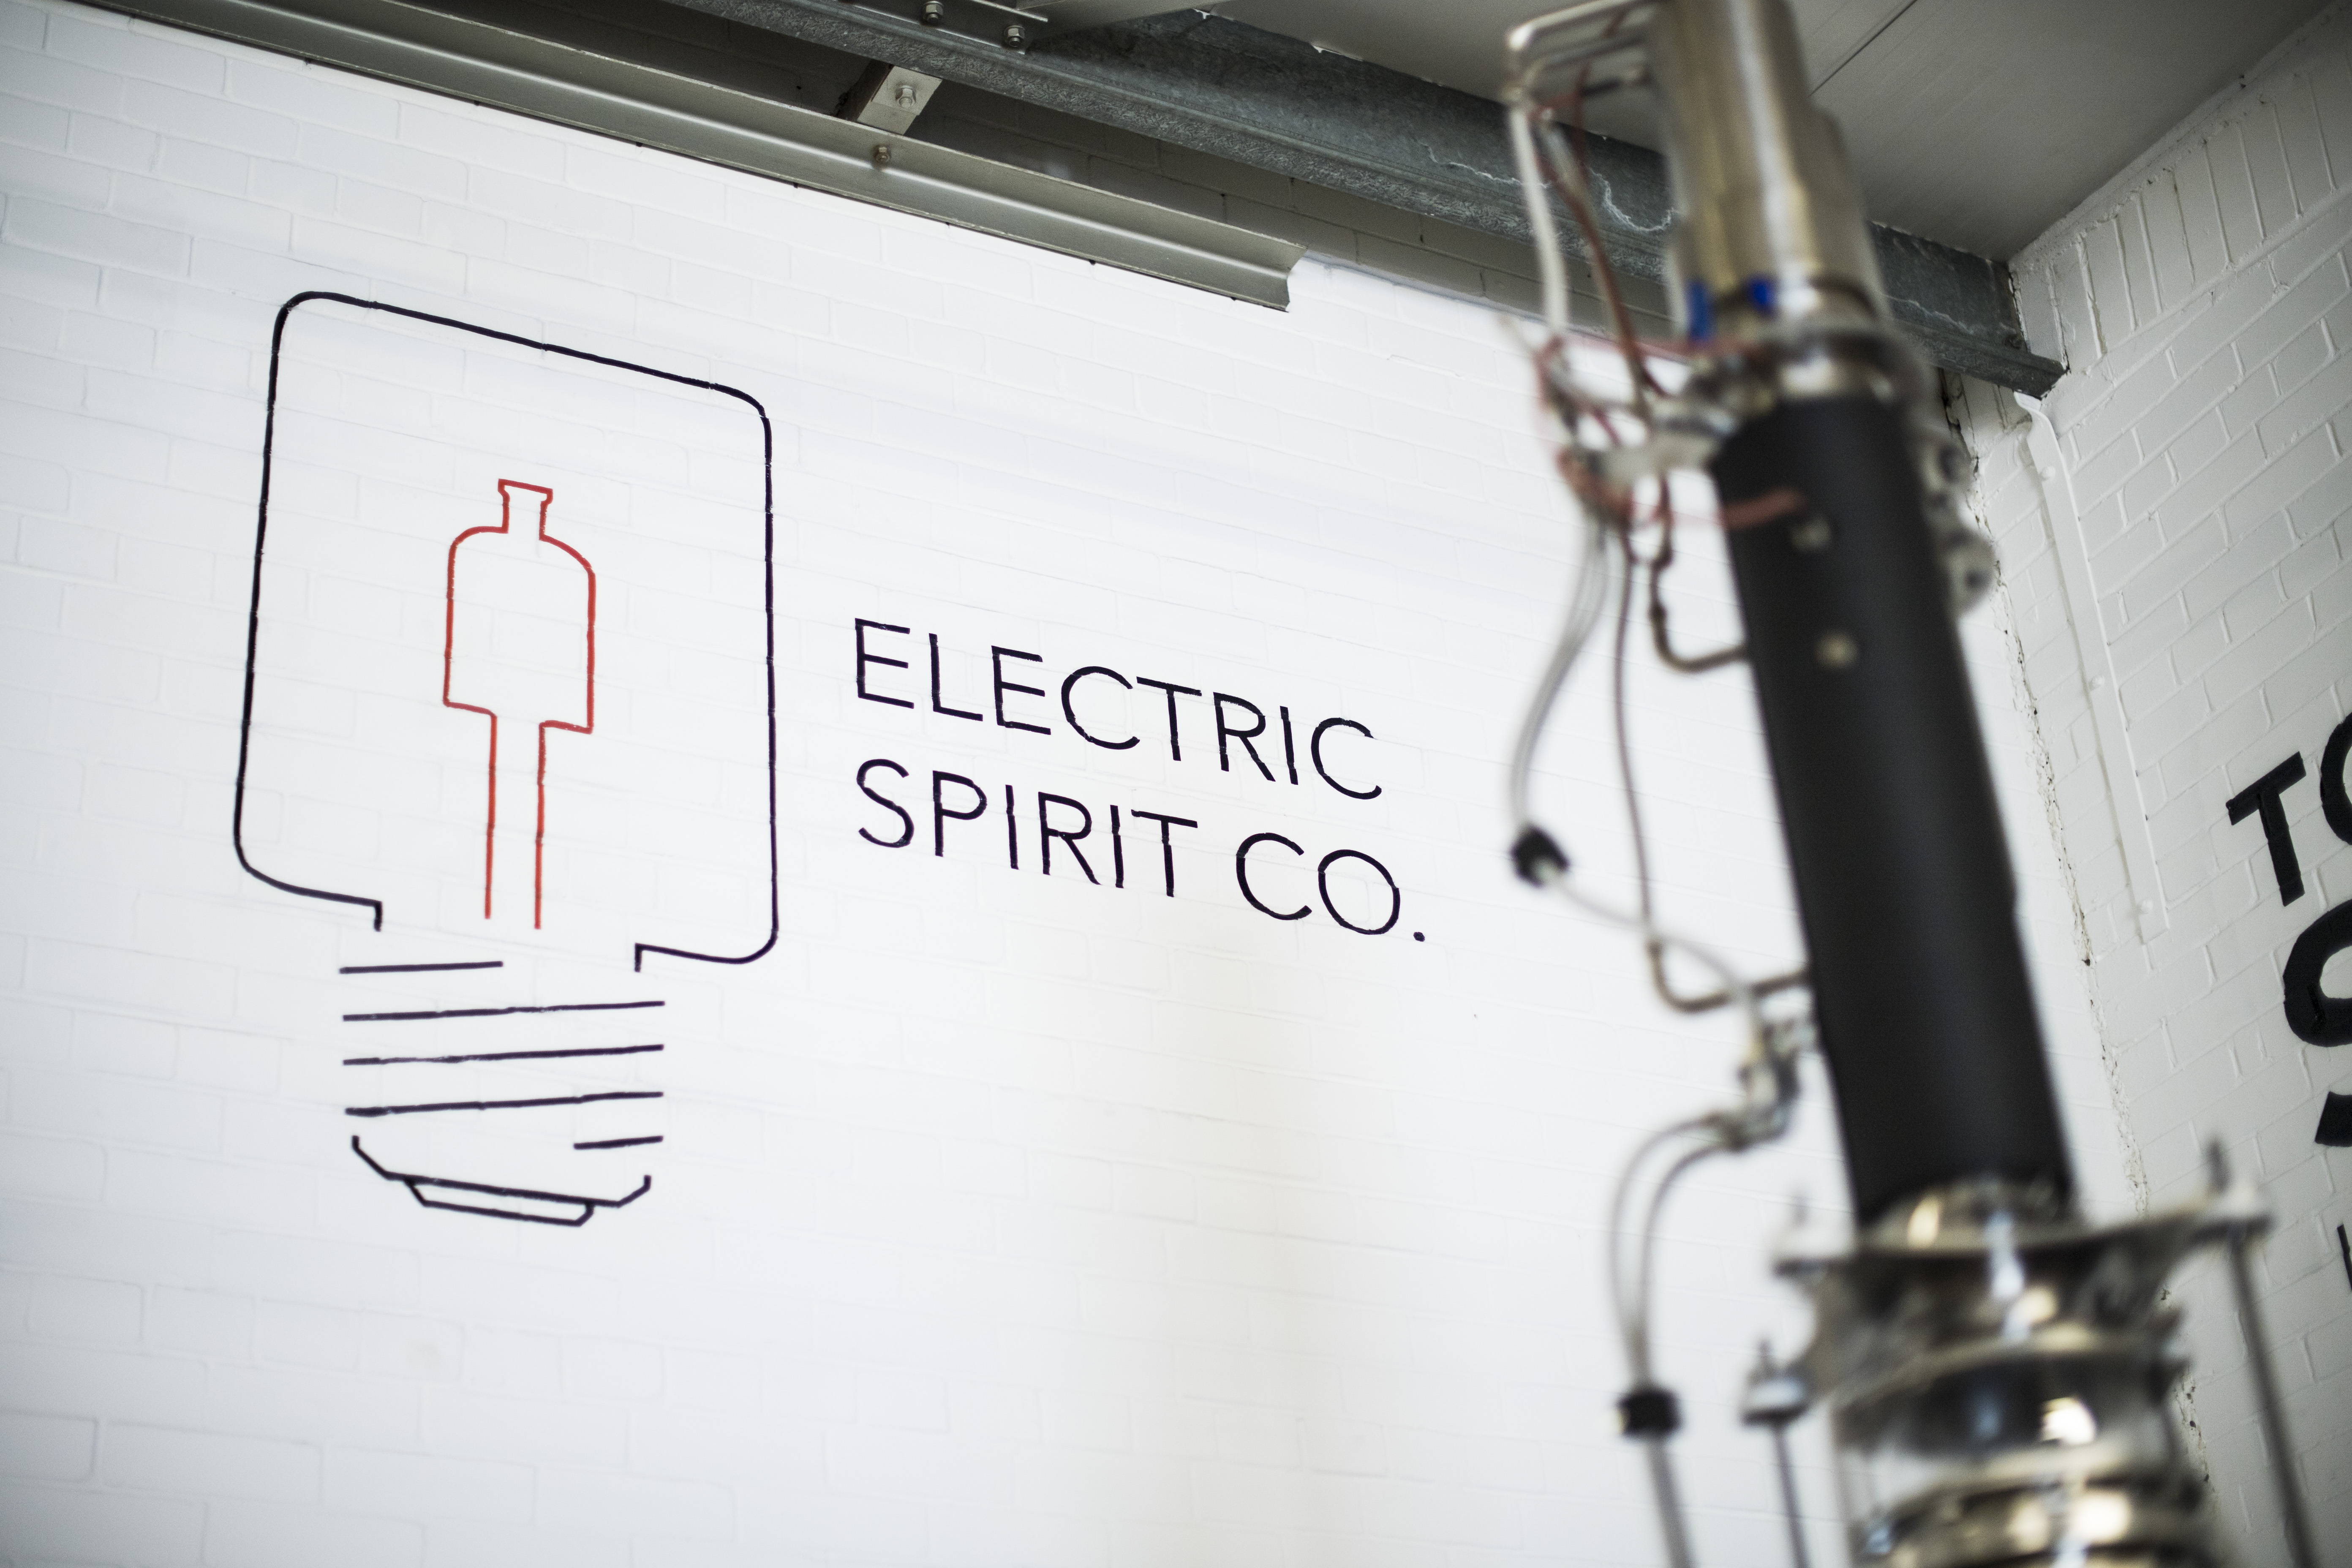 Electric Spirit Co logo on a wall.